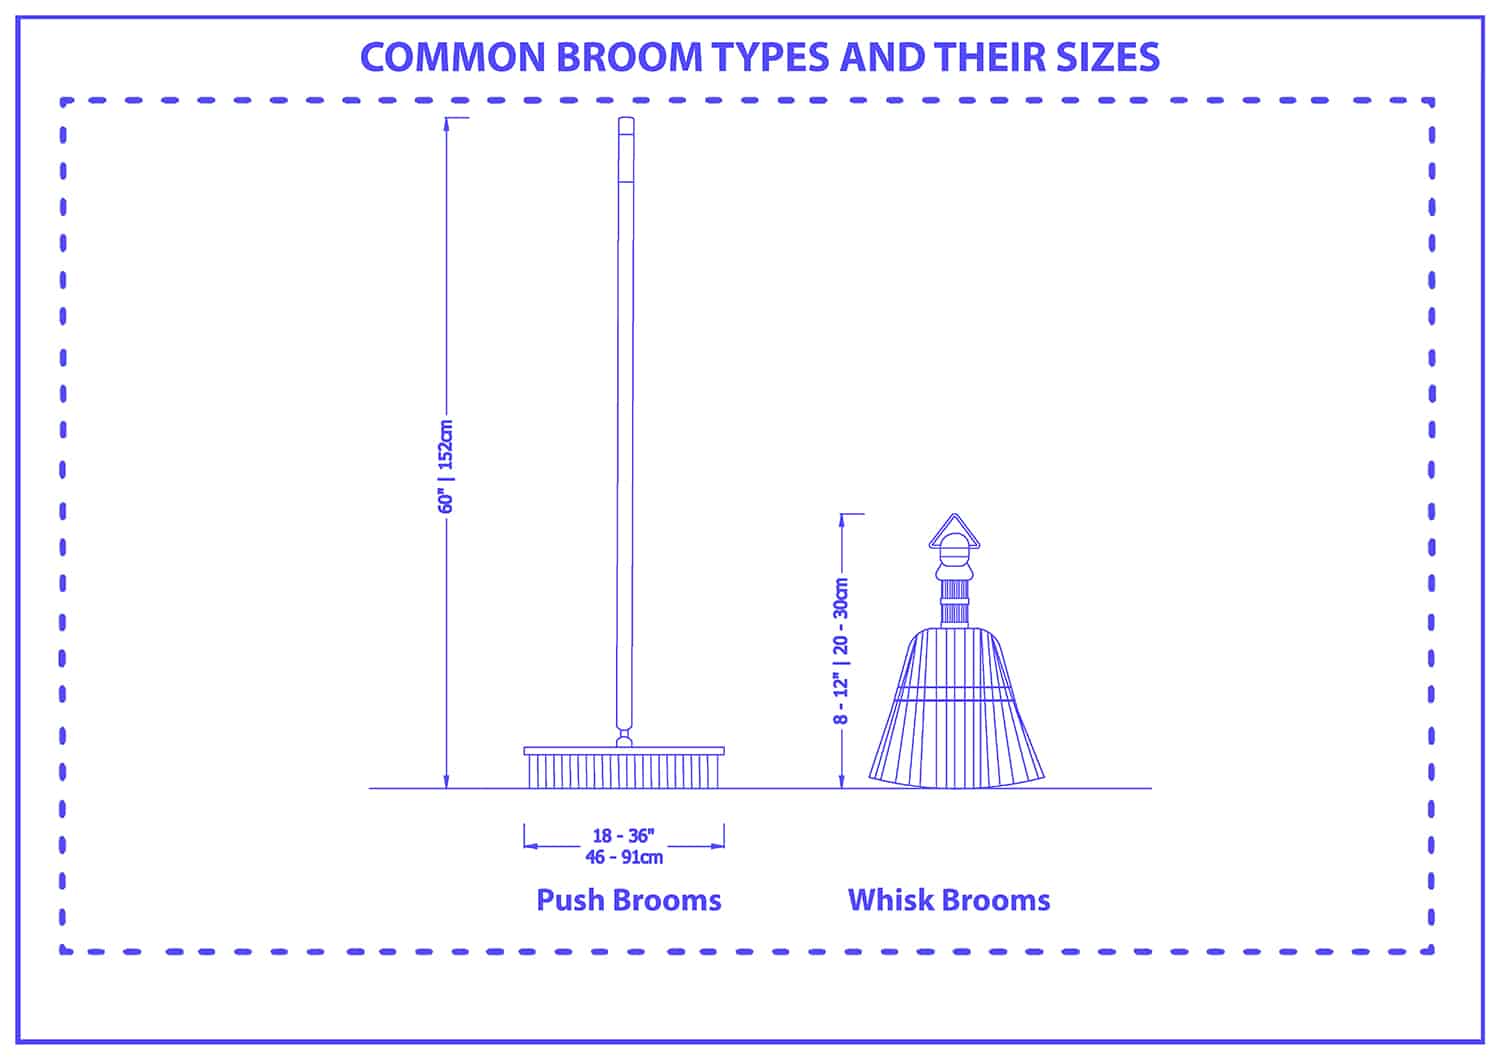 Common broom types and their sizes